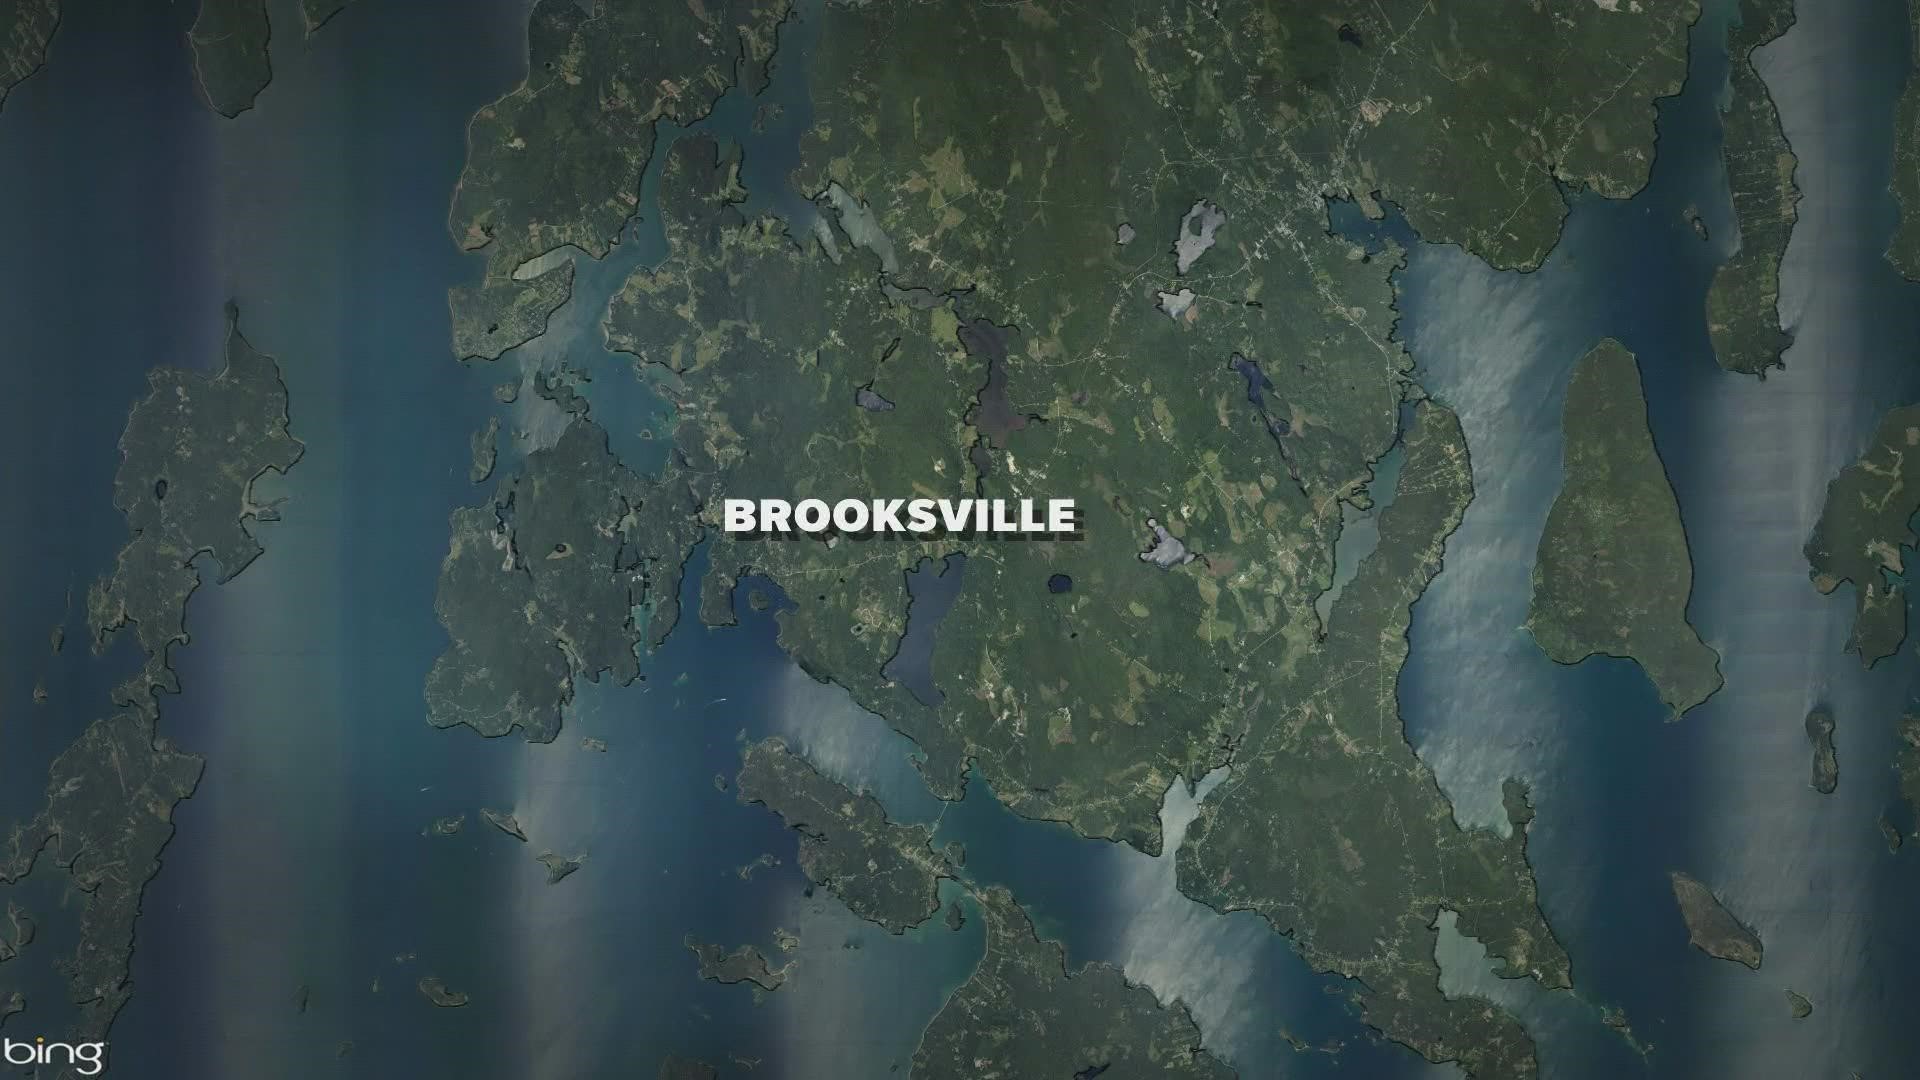 The incident could mean school for students at the nearby Brooksville Elementary School will be called off Friday out of caution.